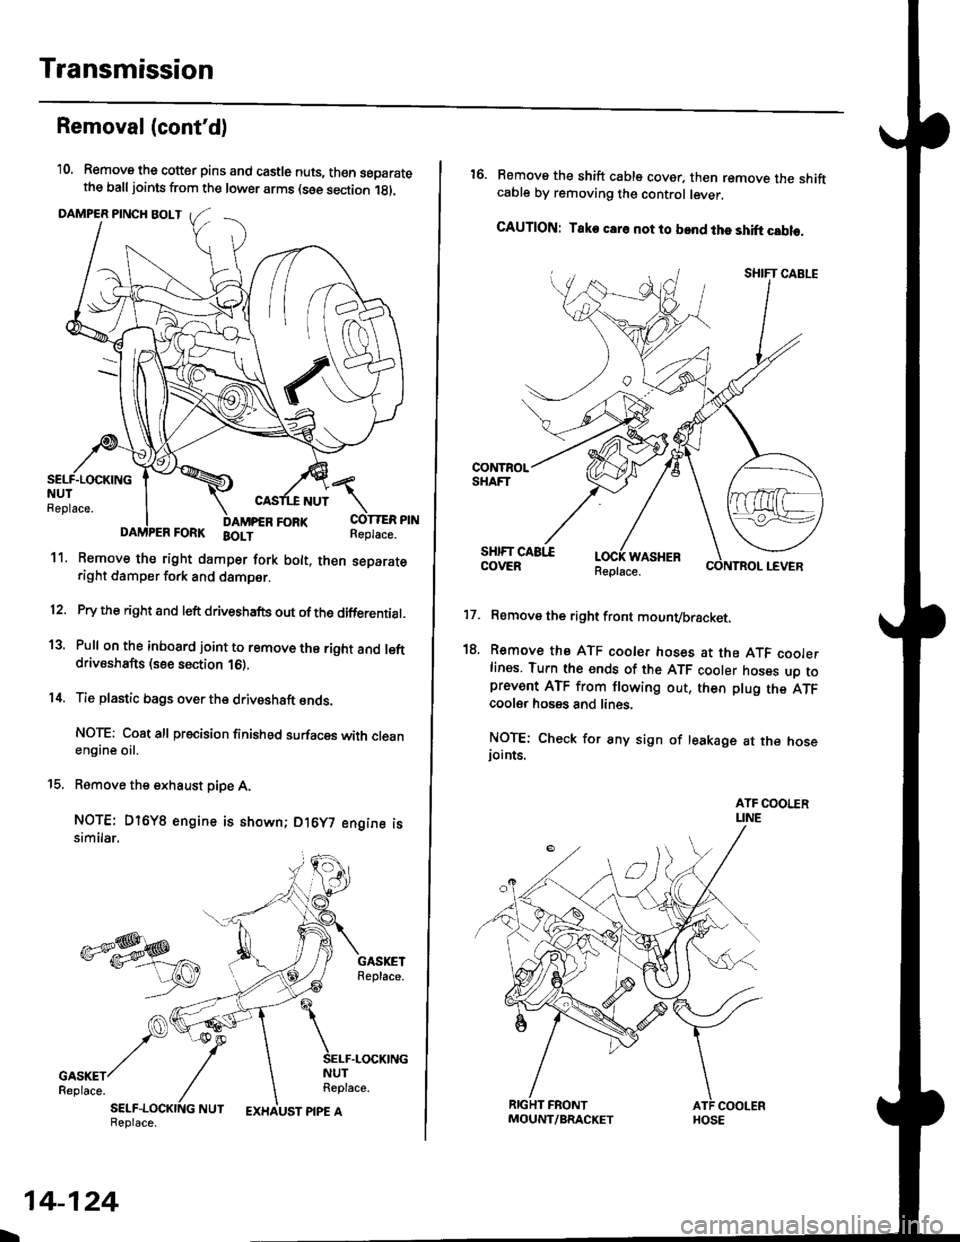 HONDA CIVIC 1998 6.G Workshop Manual Transmission
Removal(contd)
10. Remove the cotter pins and castle nuts, th€n separatethe balljoints from the lower arms (see section 1gl.
DAMPER PINCH BOLT
NUT
FORI(FORK BOLT
11. Remove the right 